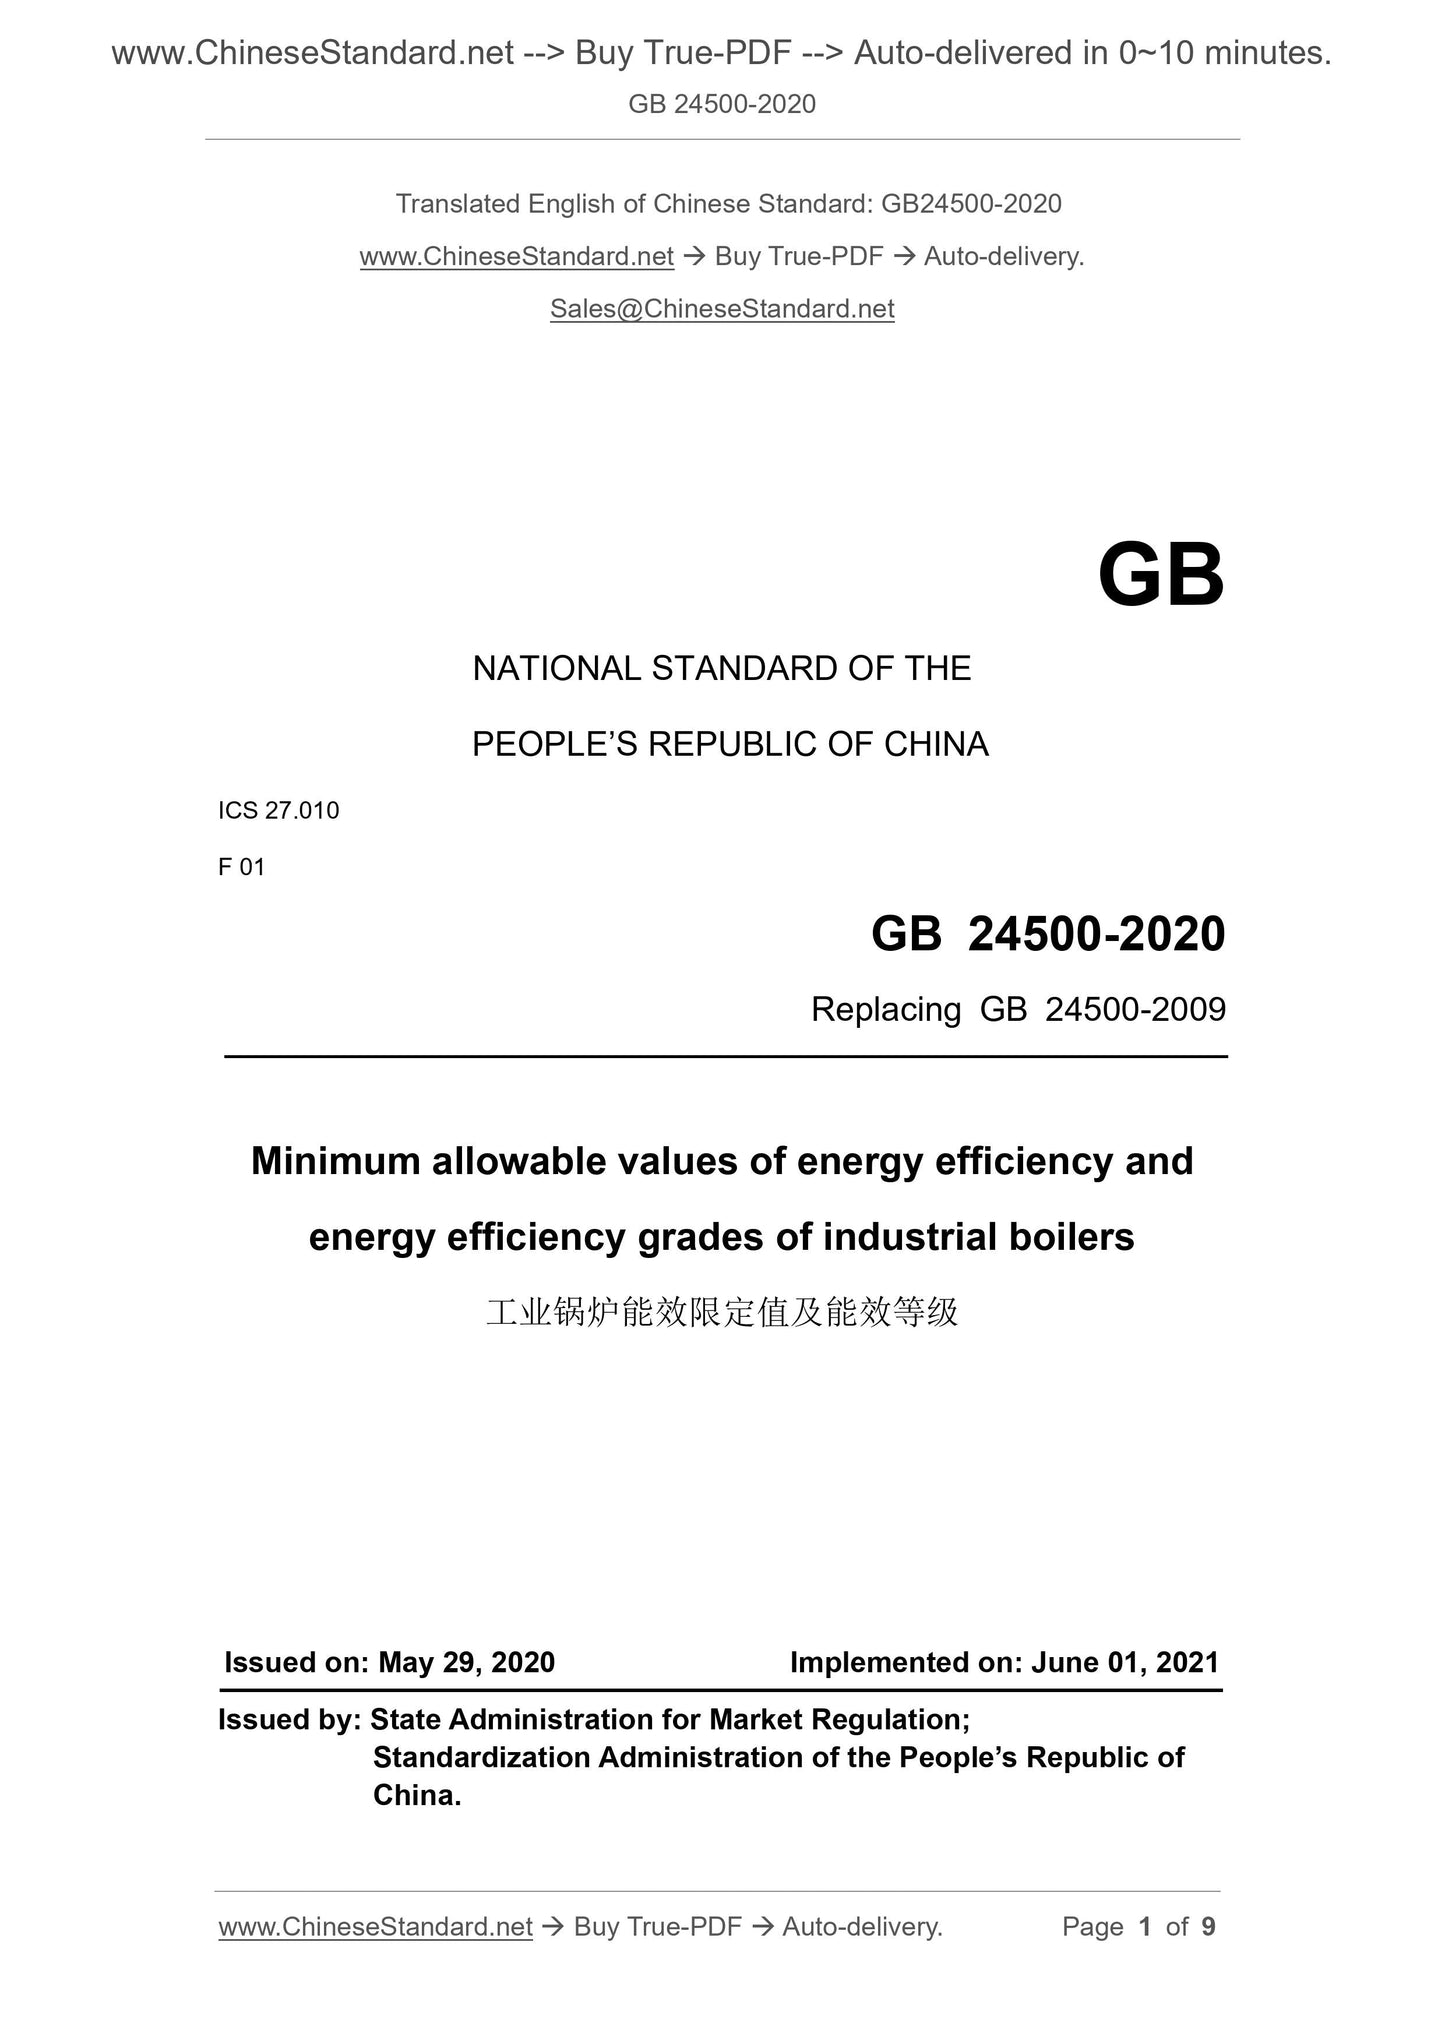 GB 24500-2020 Page 1